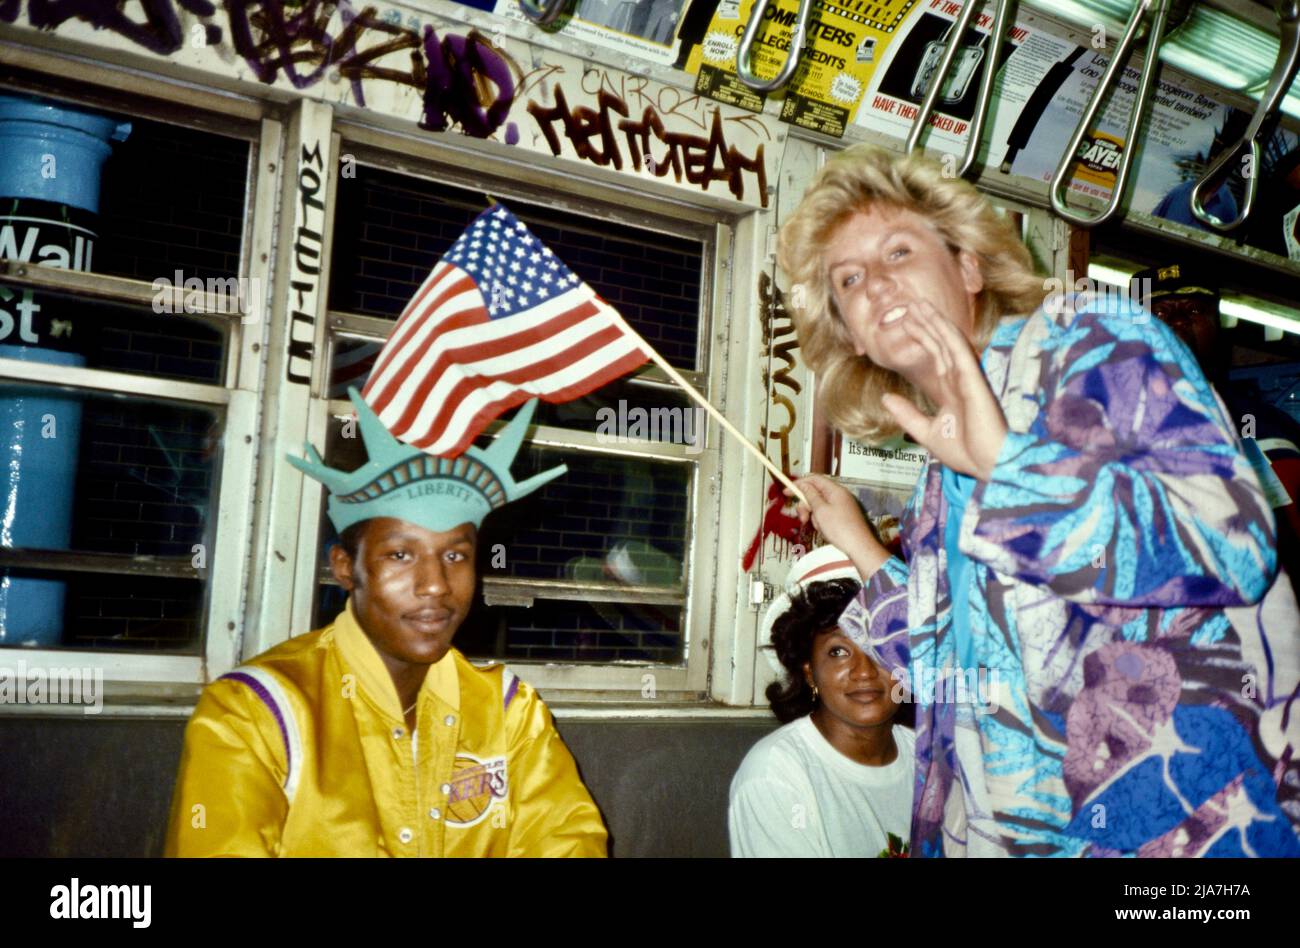 People celebrating the Statue of Liberty 100 year anniversary in New York subway car after the celebration. New York City 1986 Stock Photo